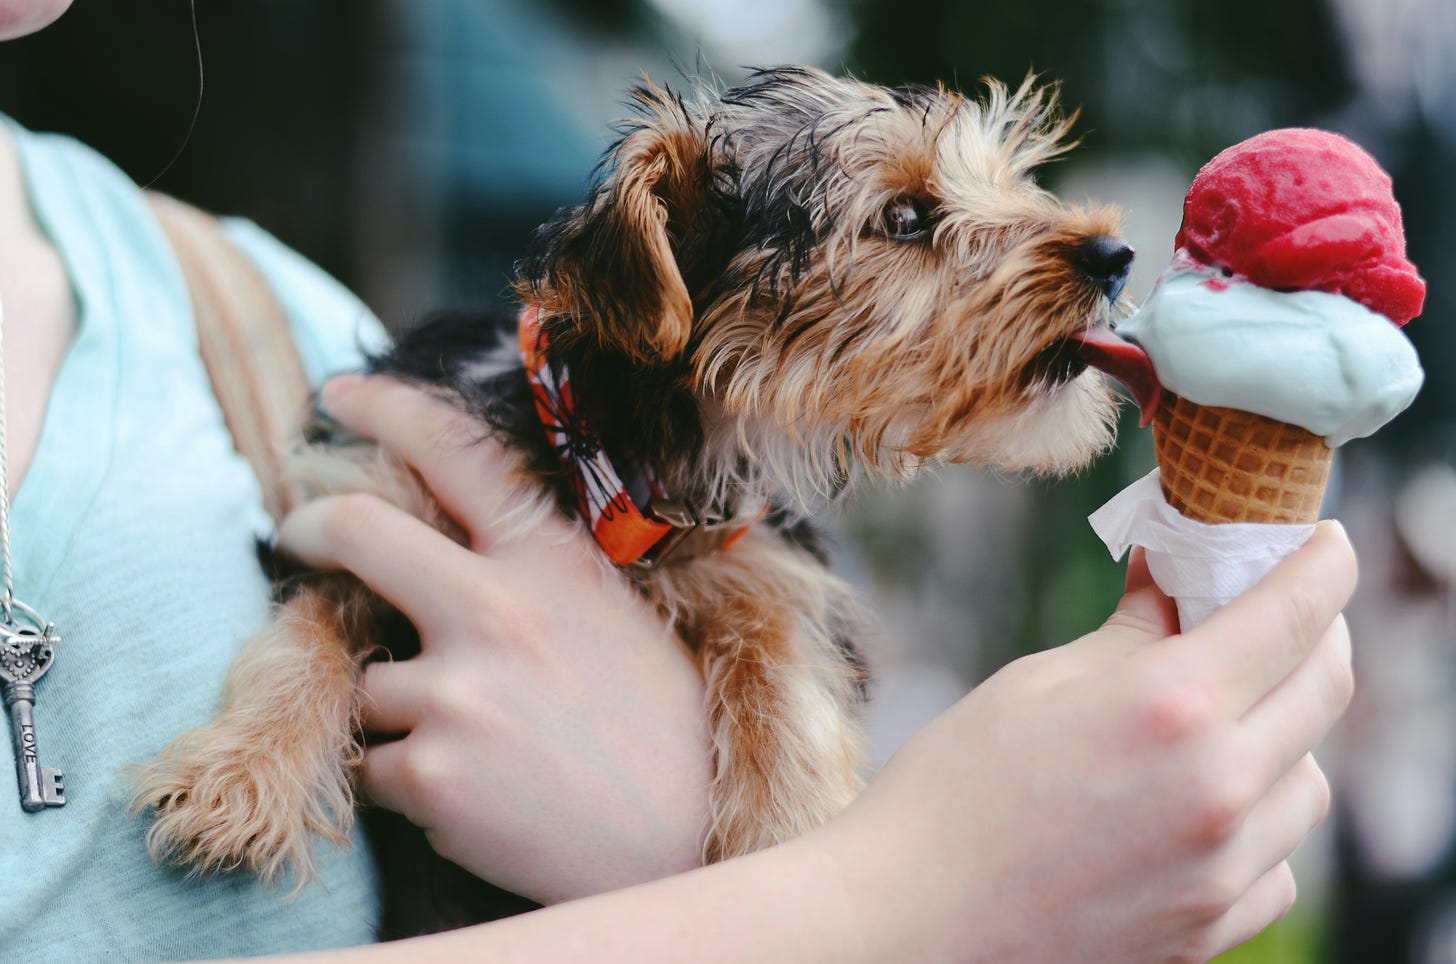 A small dog craning their neck to lick a scoop of ice cream